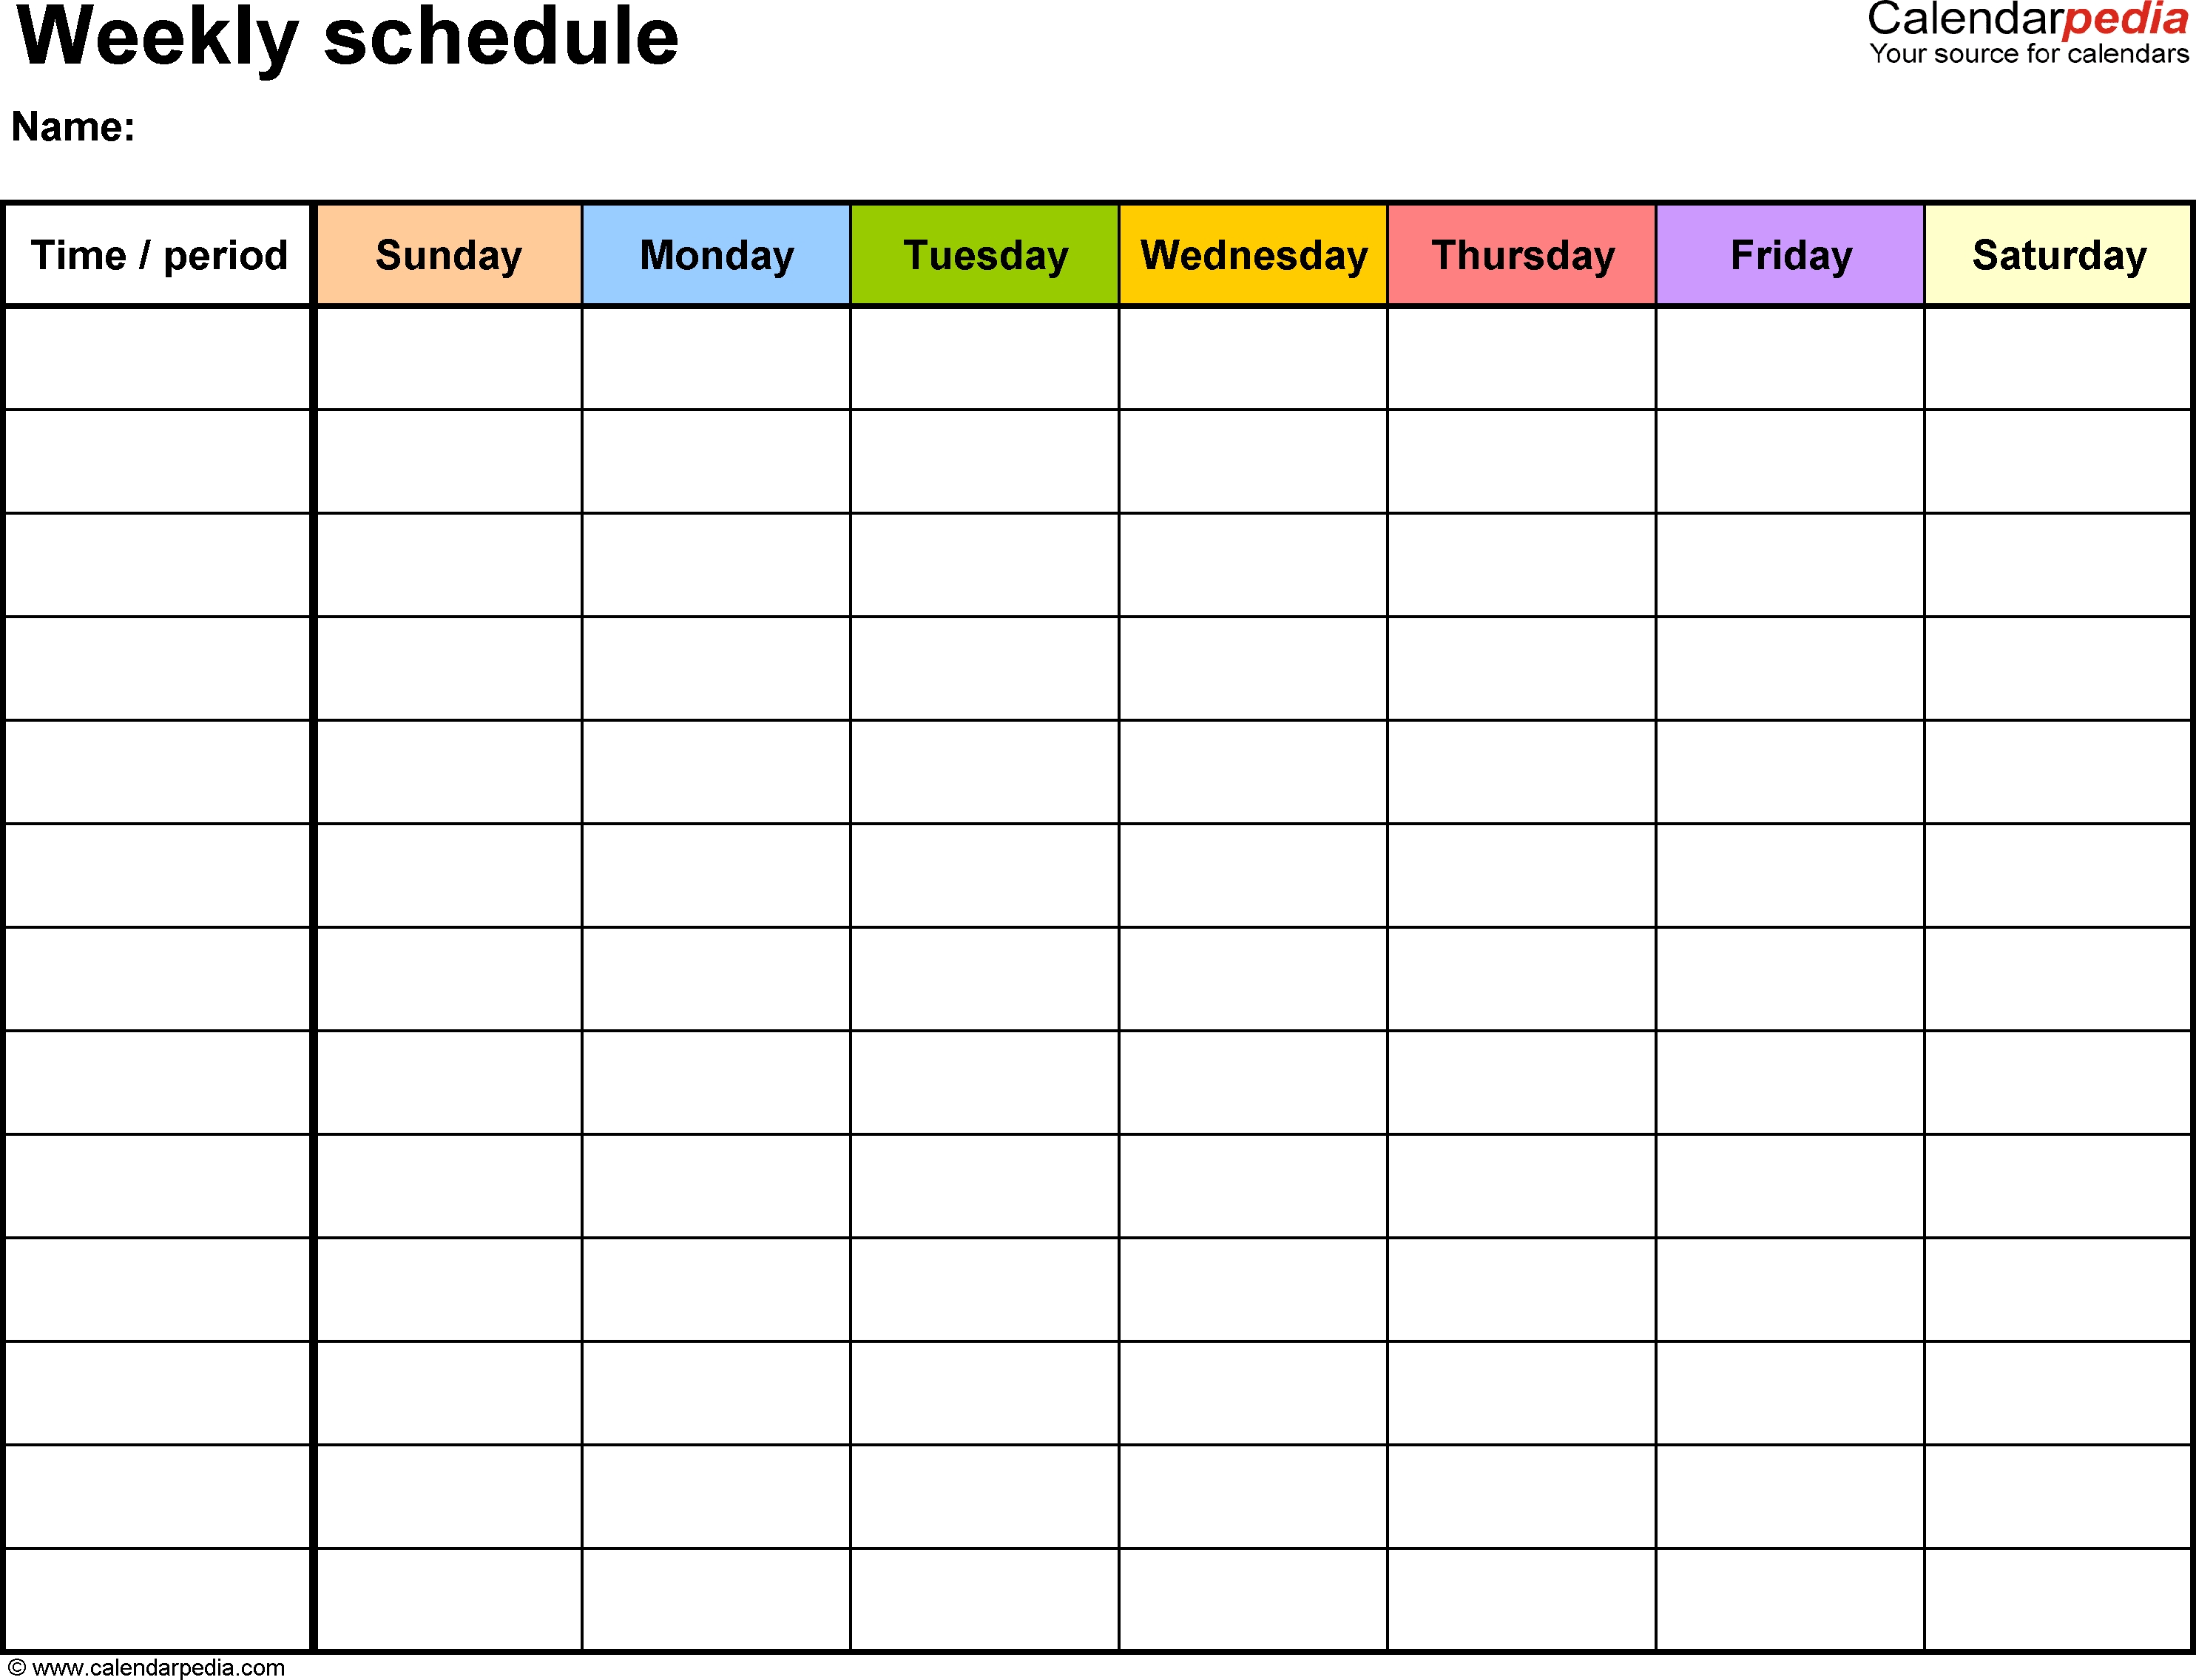 Free Weekly Schedule Templates For Pdf - 18 Templates with regard to Blank Calendar Mon Through Fri With No Dates Or Month